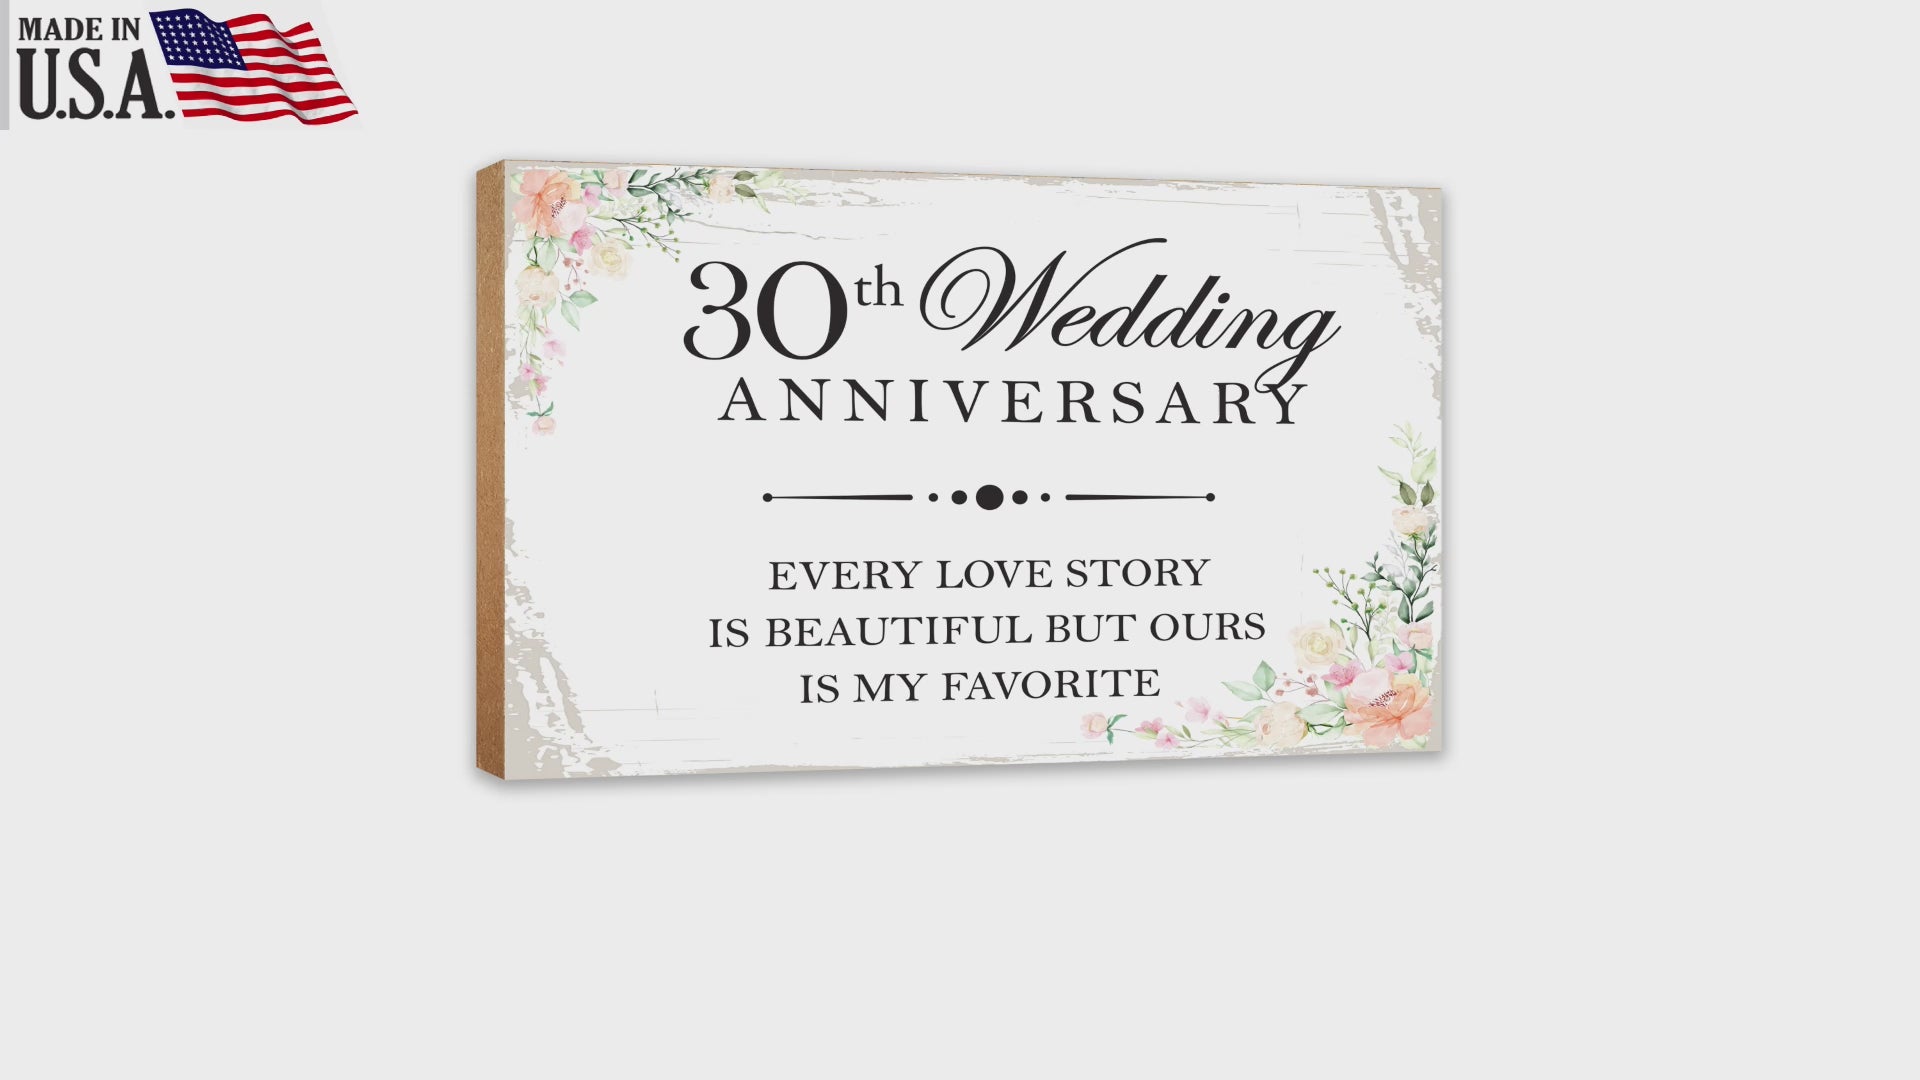 30th Wedding Anniversary Unique Shelf Decor and Tabletop Signs Gift for Couples - Every Love Story